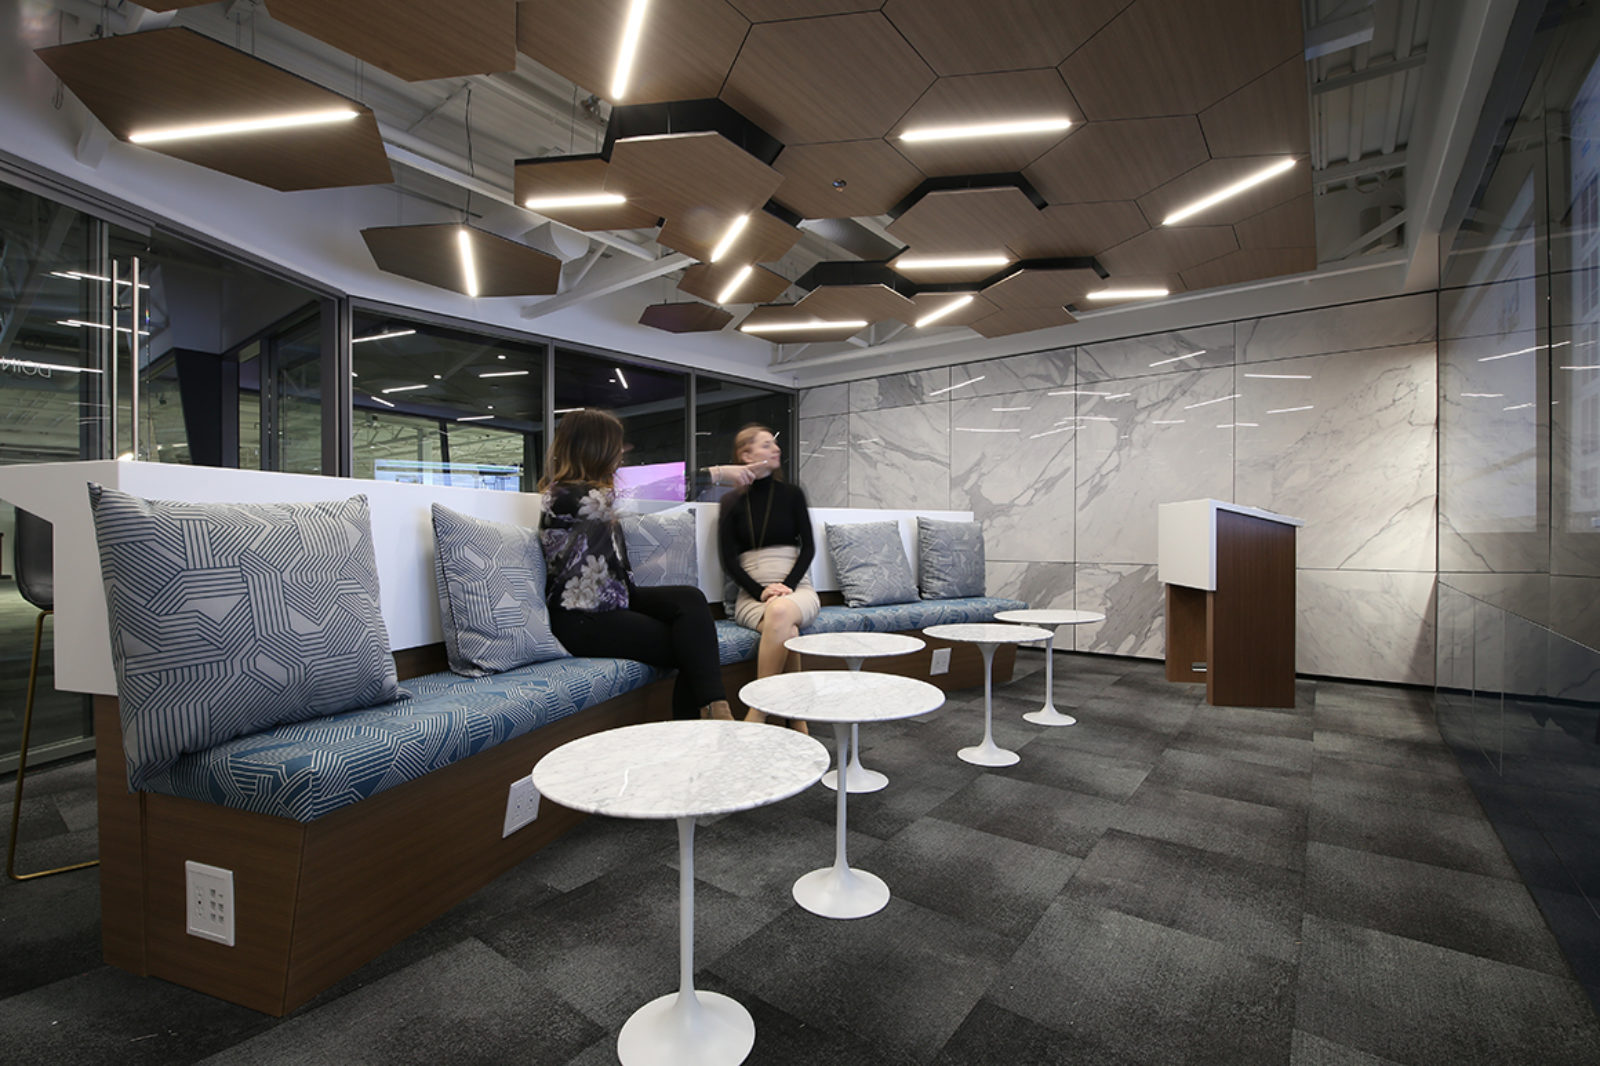 Collaborative space inside DIRTT room, 2 women sitting on booth seating, DIRTT ceilings and walls